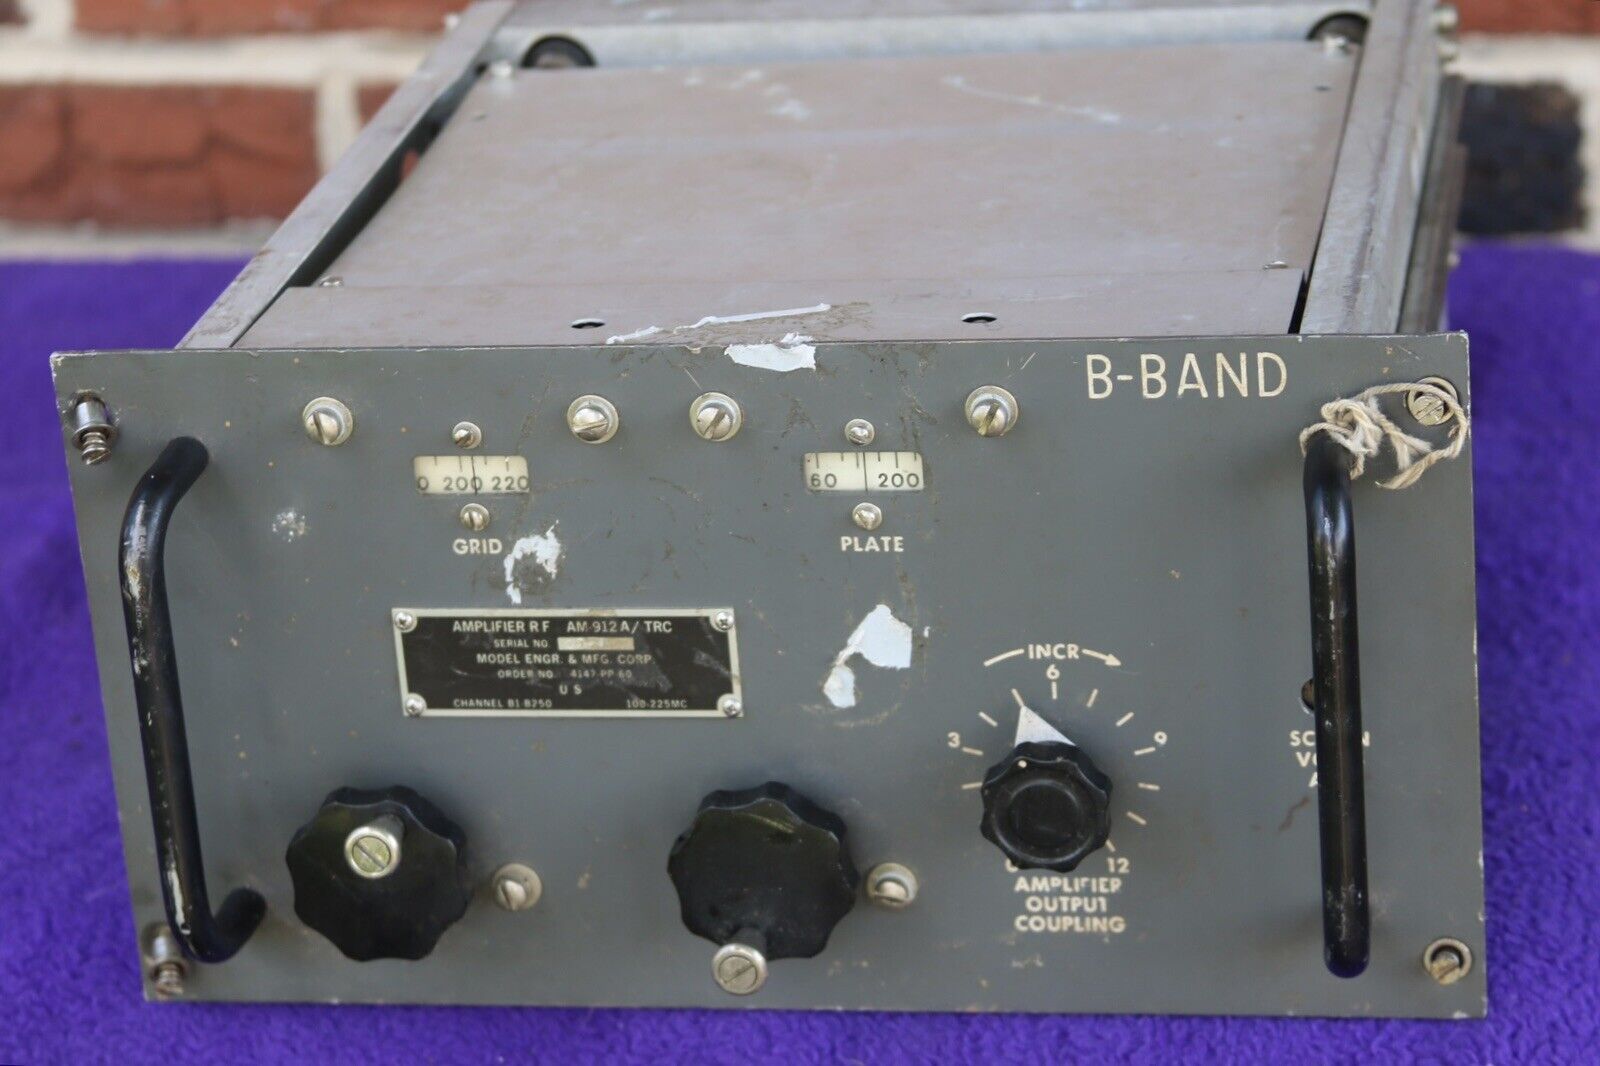 VINTAGE US ARMY AM-912/TRC TUBE VHF AMPLIFIER 100-225MHZ B-BAND